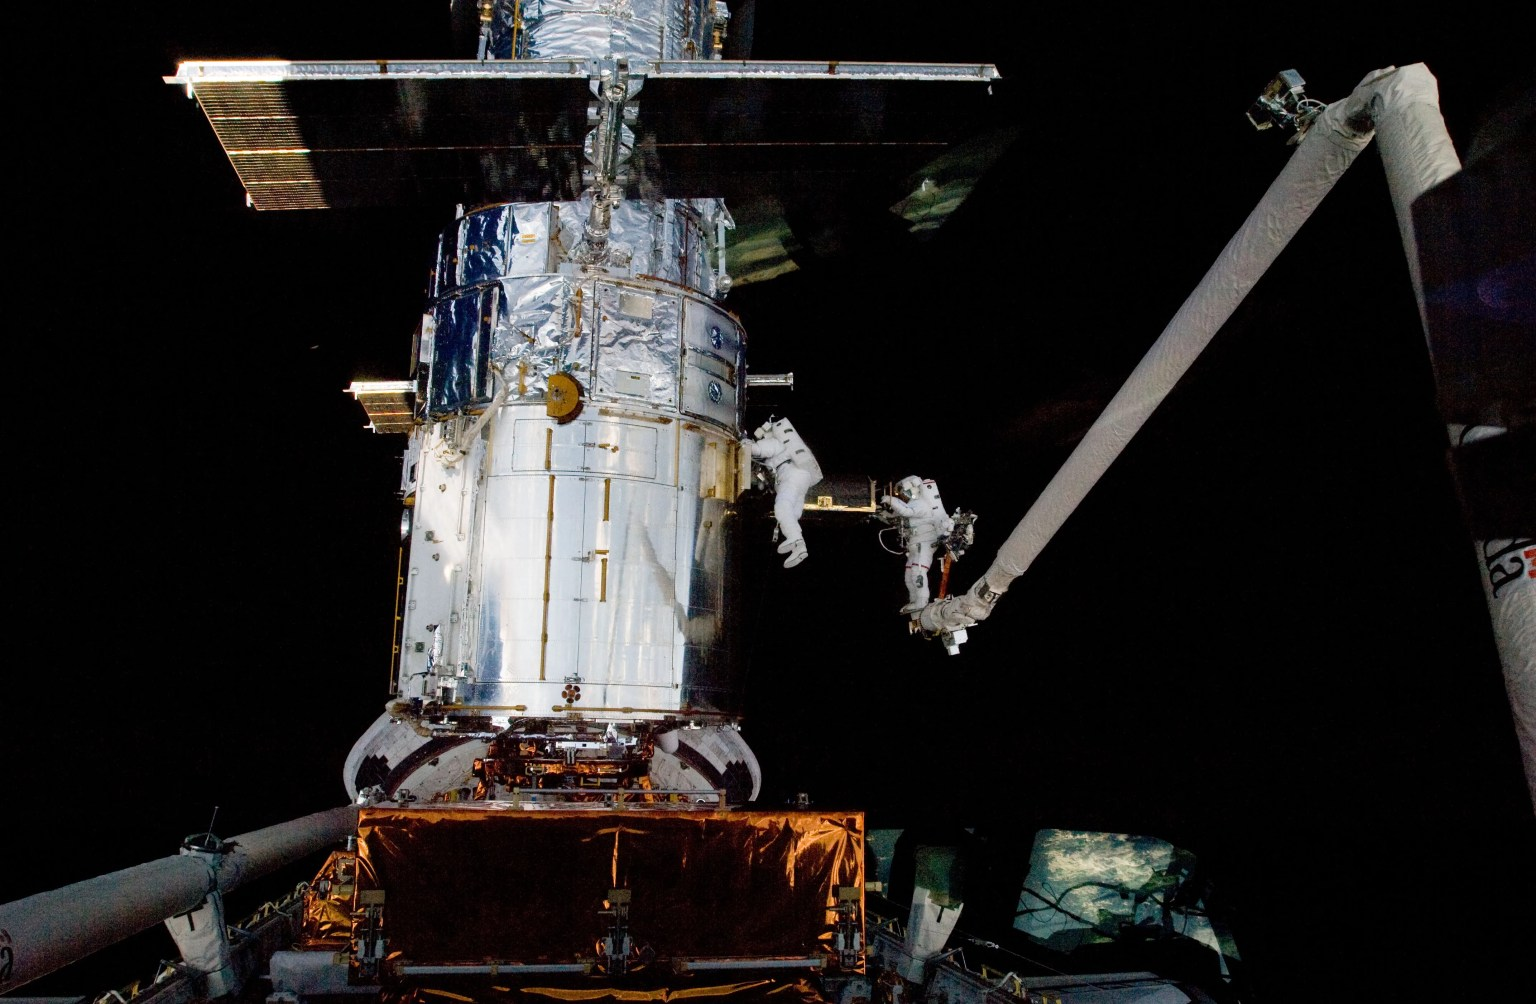 Two astronauts in white space suits tethered on an arm servicing the Hubble Space Telescope in space.